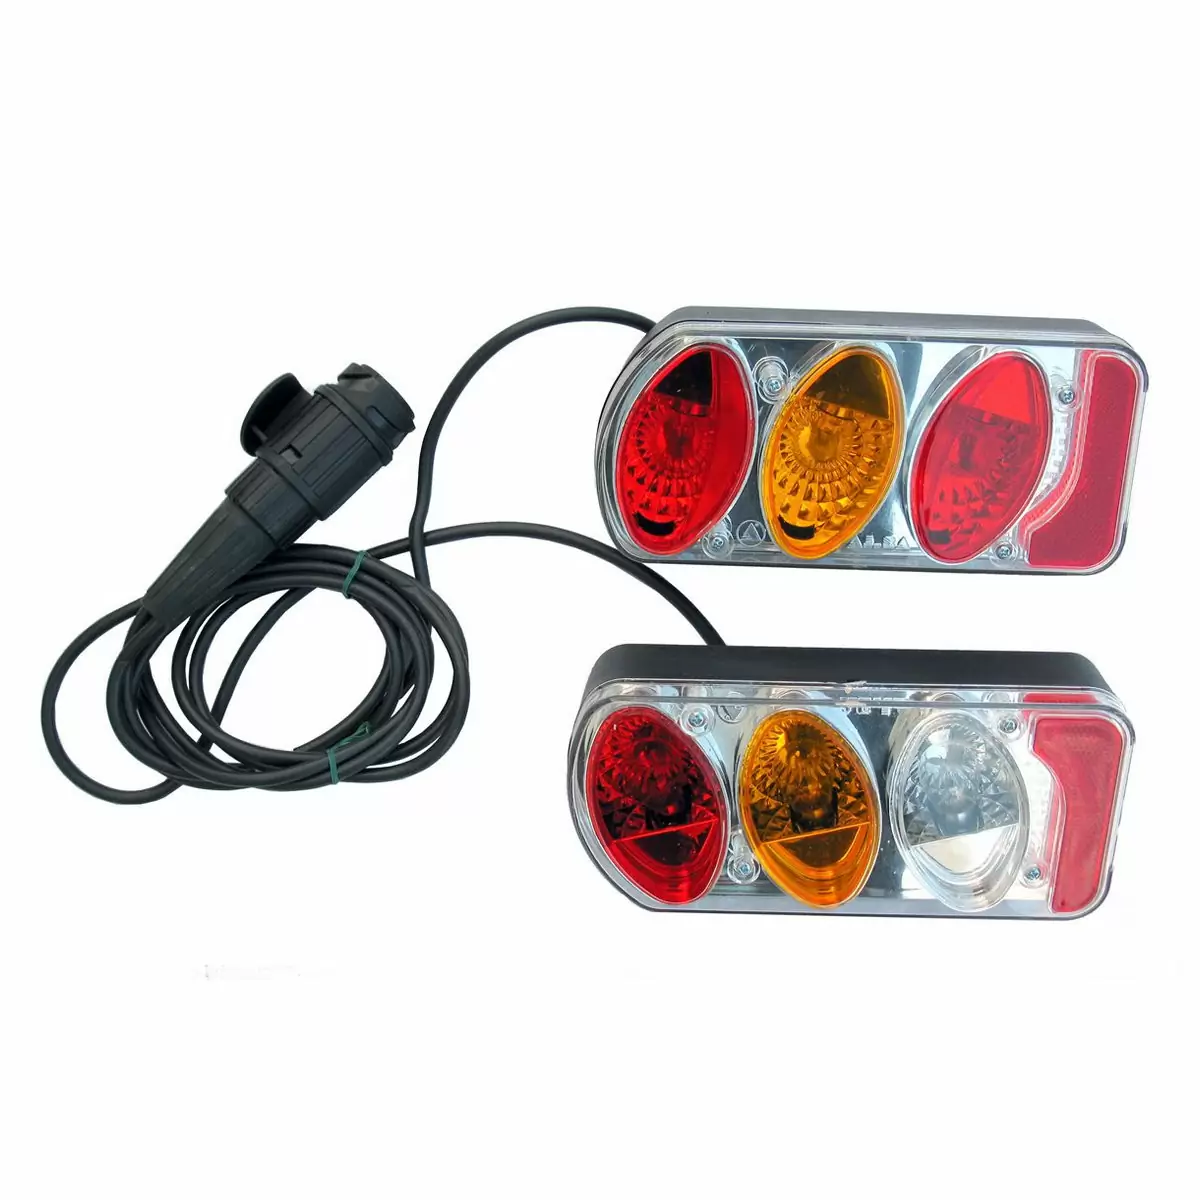 Rear lights with 13 poles cable for bike carrier #1